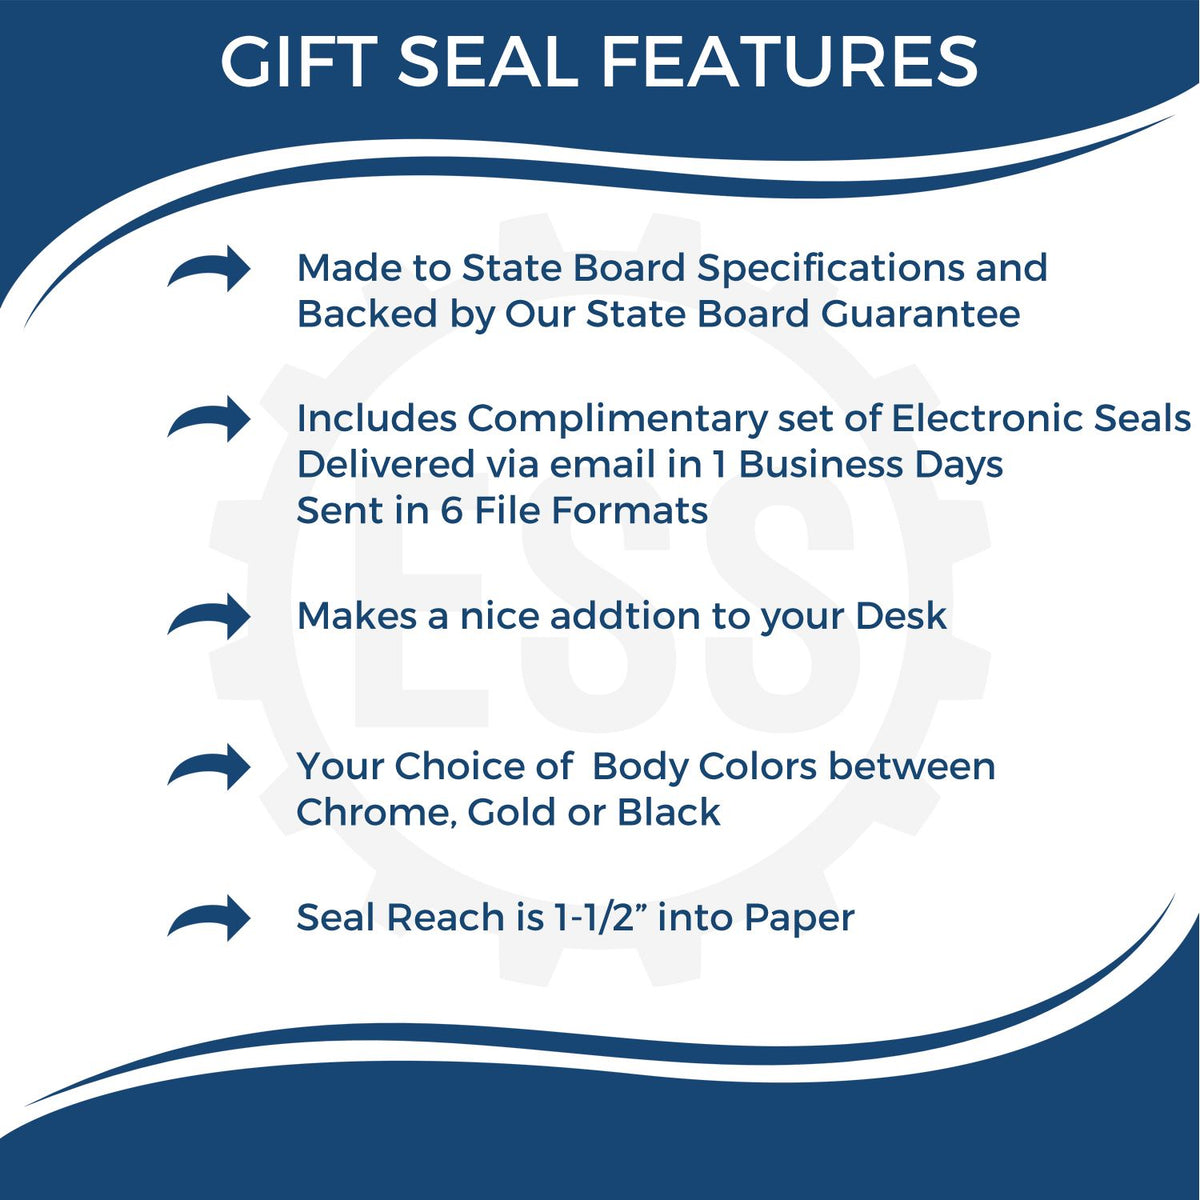 A picture of an infographic highlighting the selling points for the Gift Illinois Engineer Seal